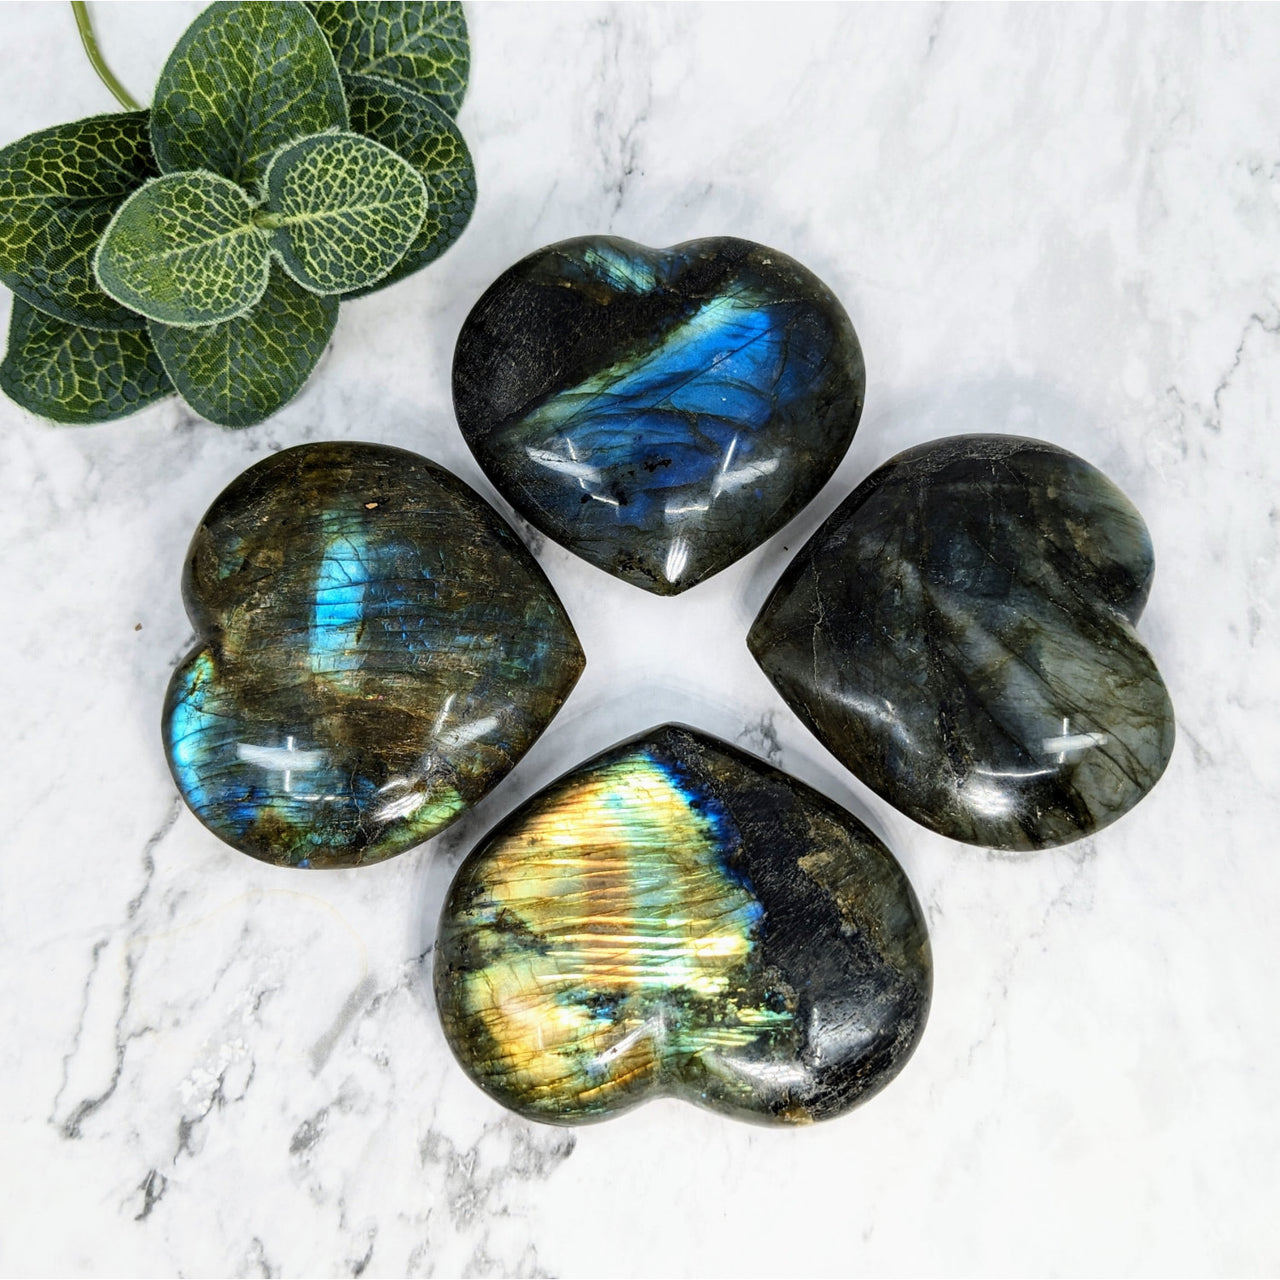 Labradorite hearts with green plant in background, 2.5-2.7’, product code LV5721